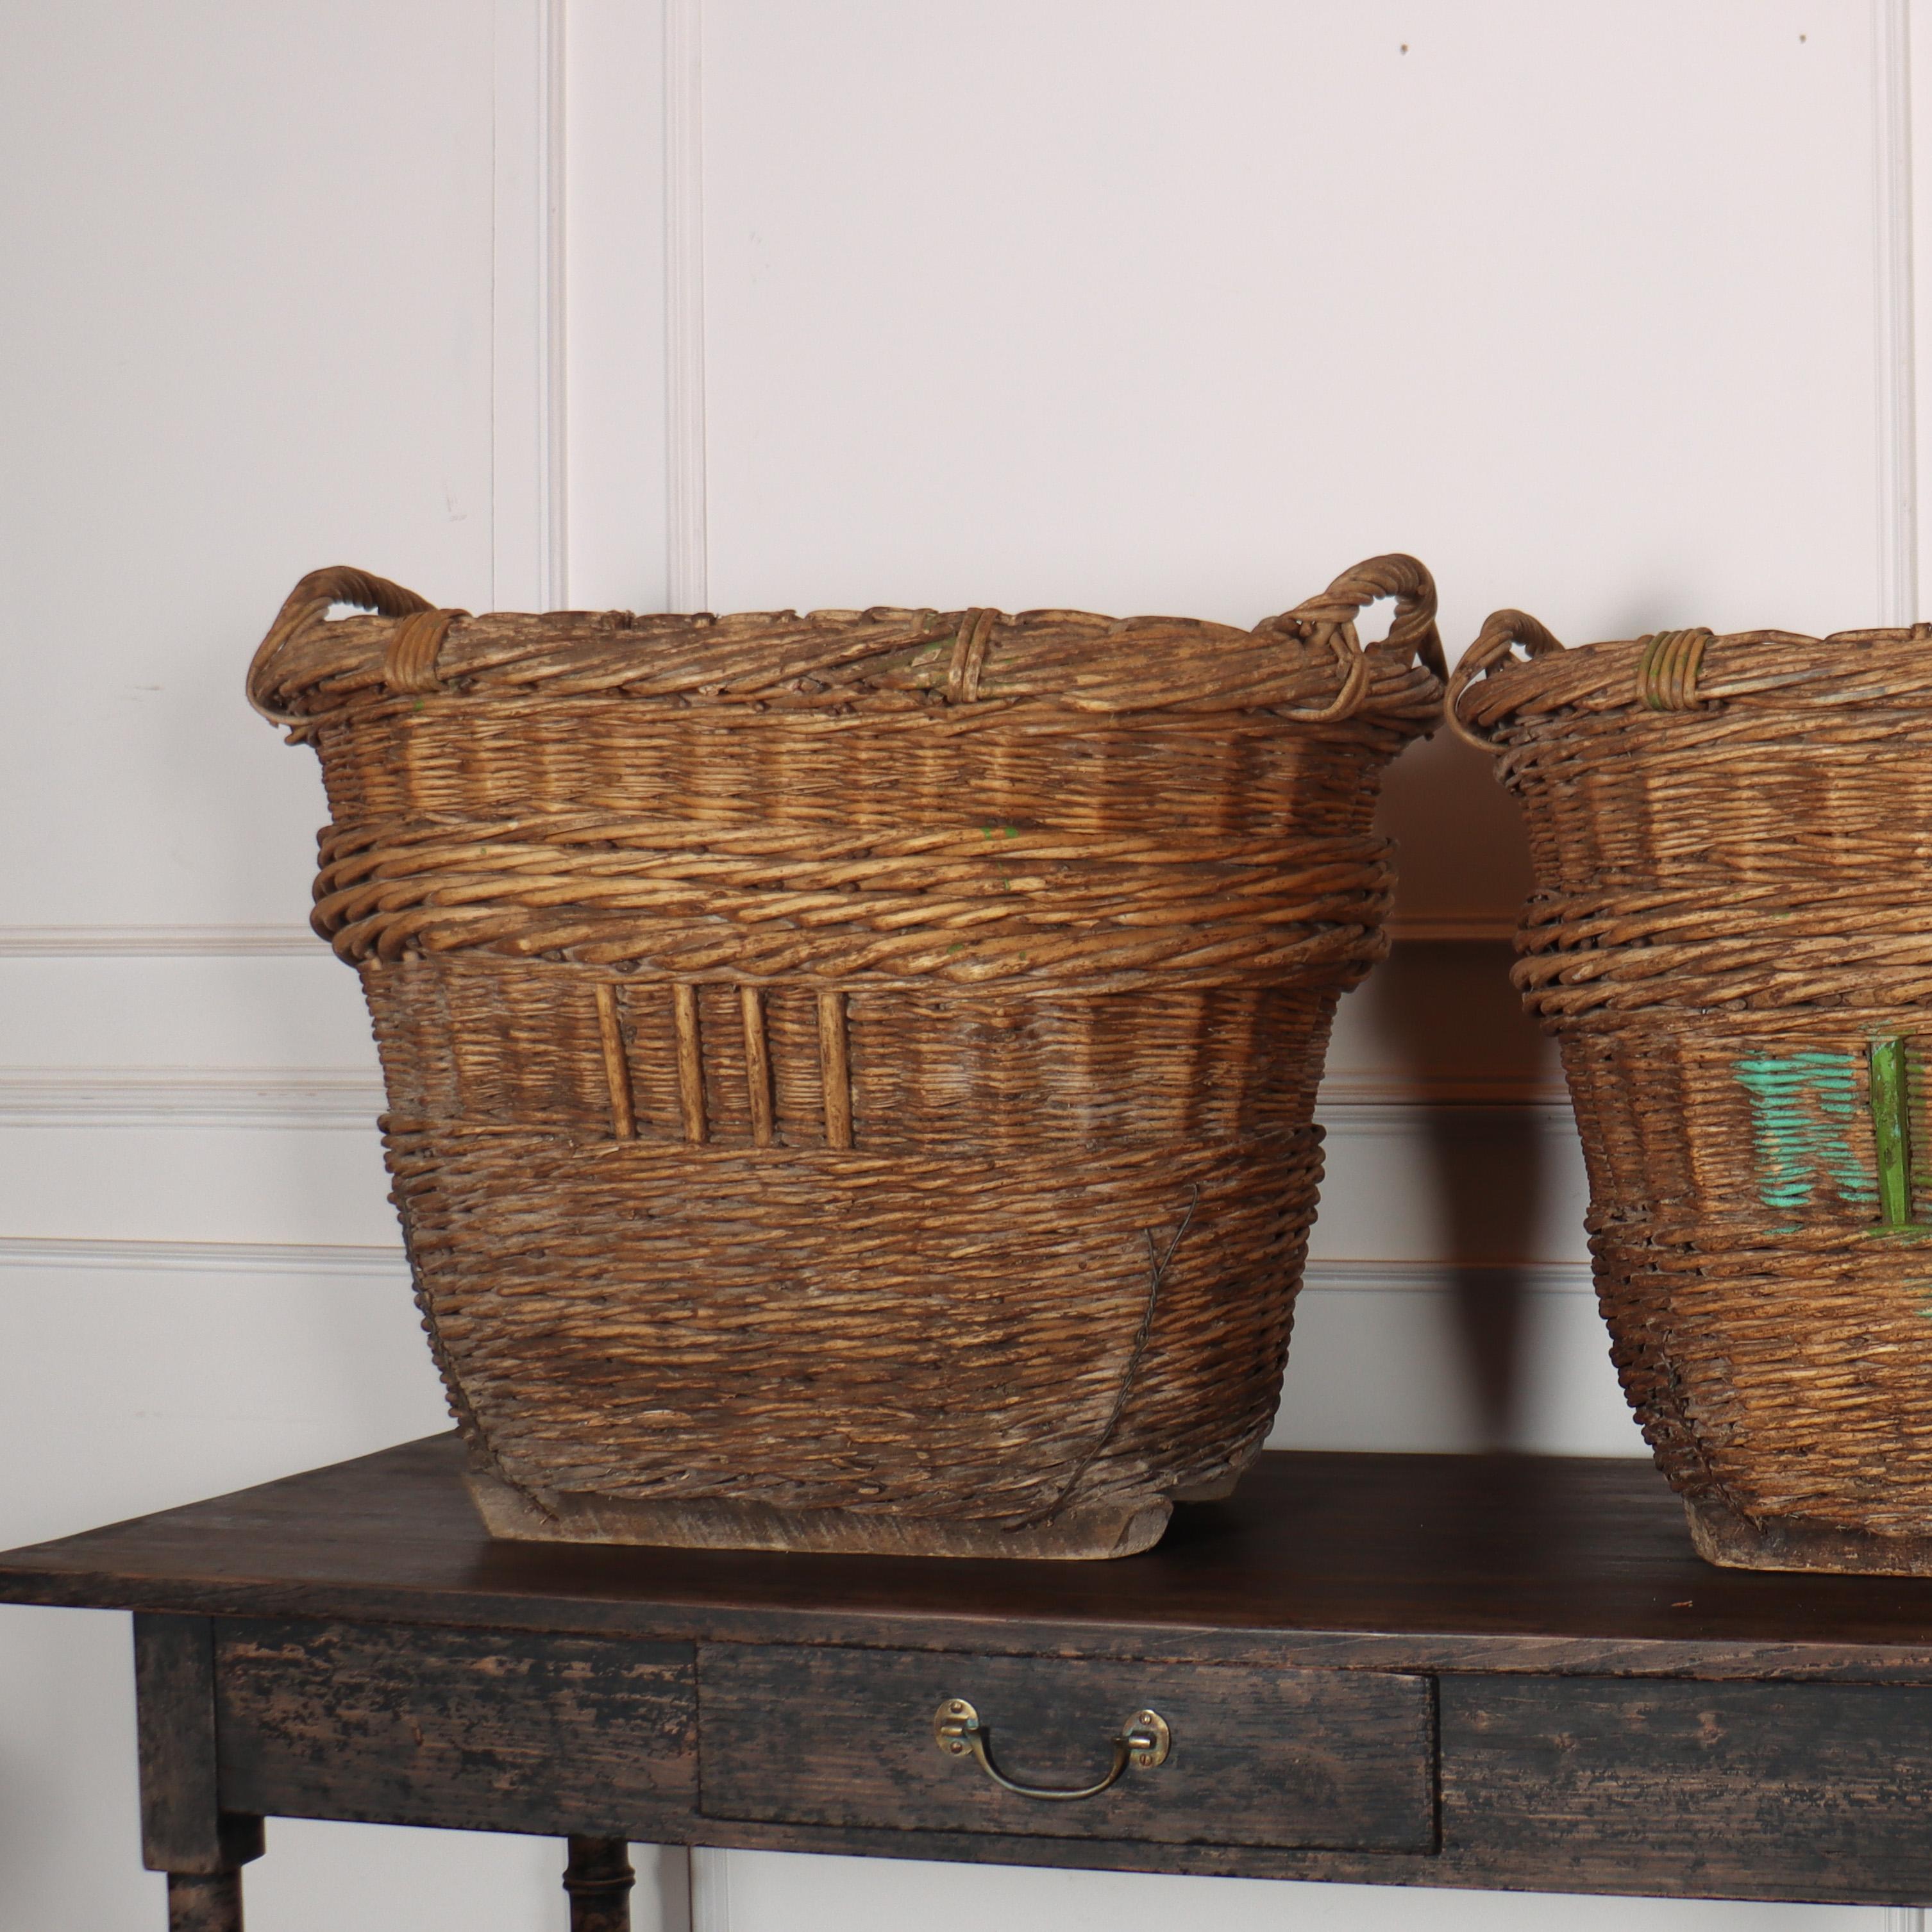 Stunning collection of early 20th C champagne grape baskets. Very good quality, would make great log baskets. 1920.

5 available to purchase.

Reference: 8102

Dimensions
32.5 inches (83 cms) Wide
26 inches (66 cms) Deep
26 inches (66 cms) High